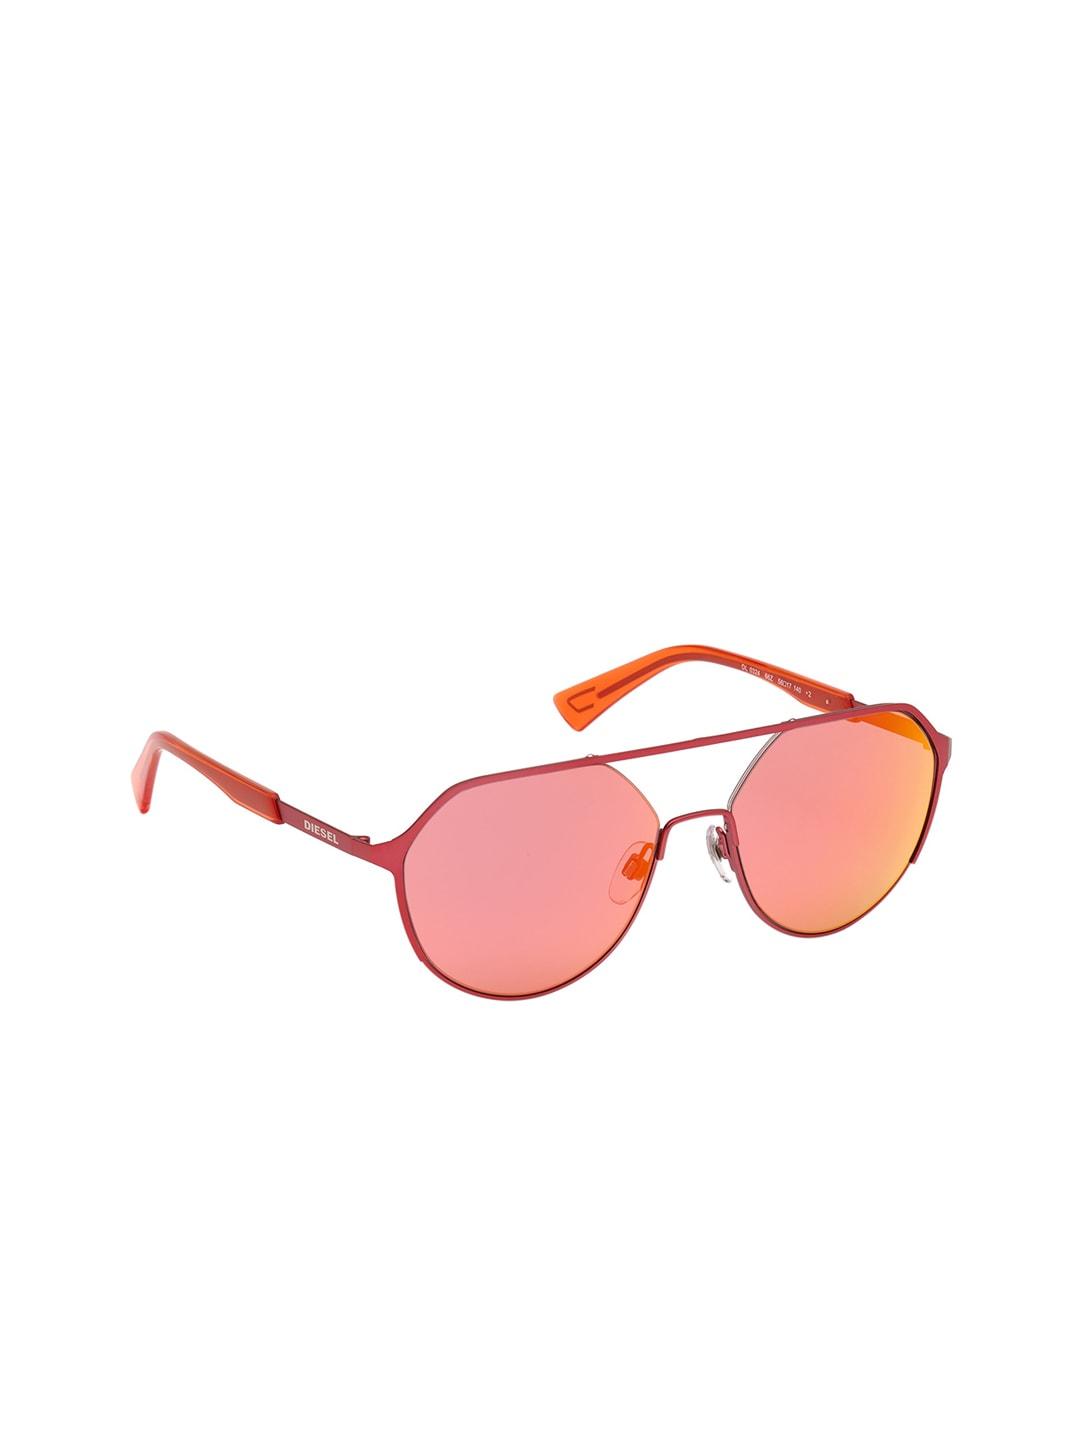 diesel men pink lens oval sunglasses with uv protected dl0324 56 66z